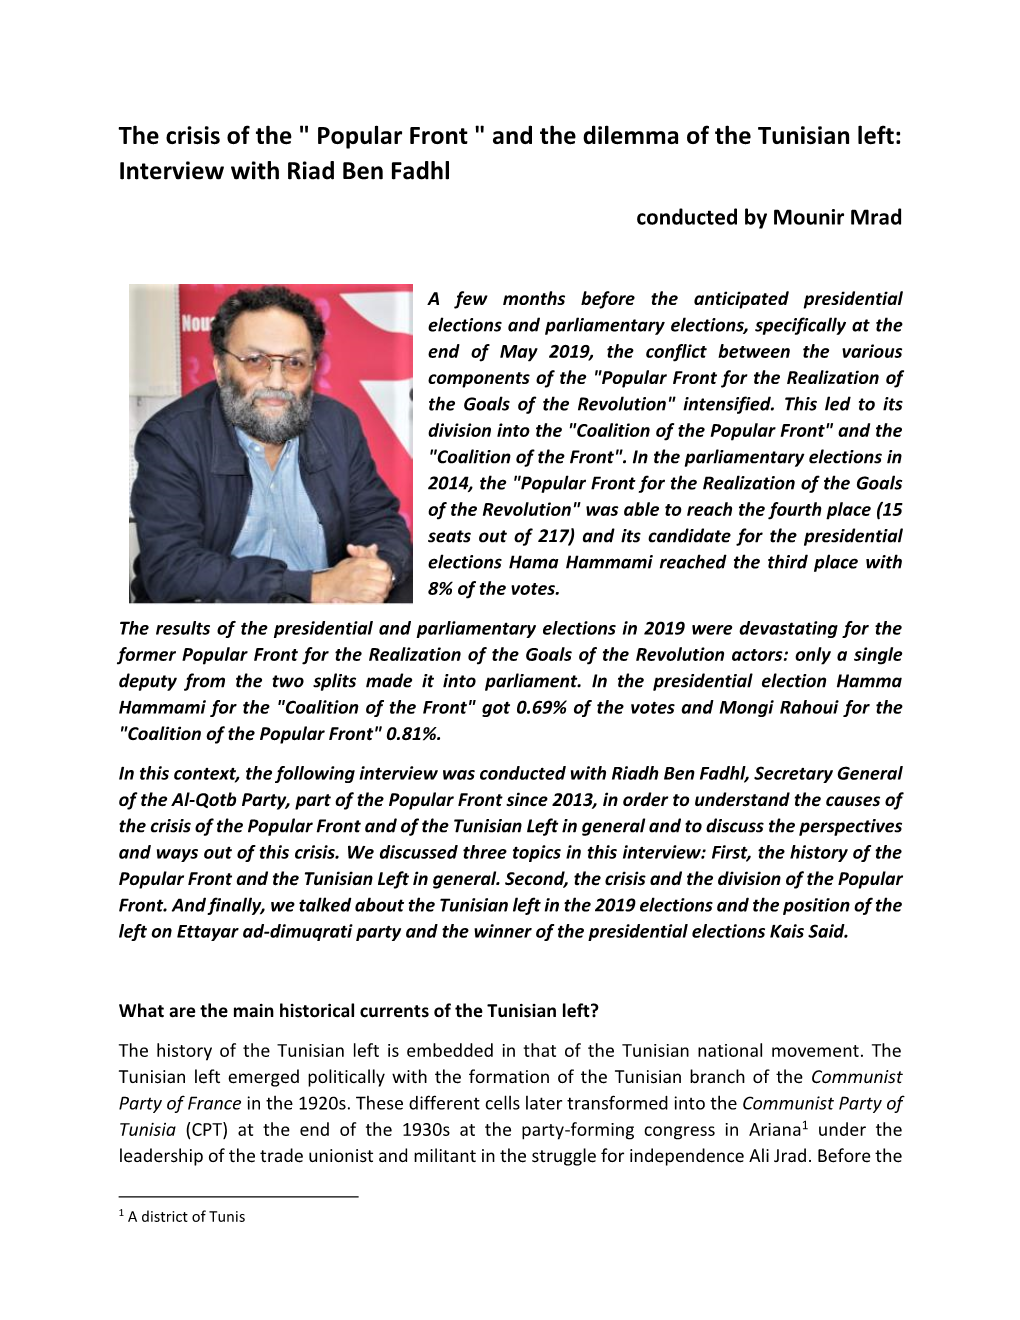 Interview with Riad Ben Fadhl Conducted by Mounir Mrad